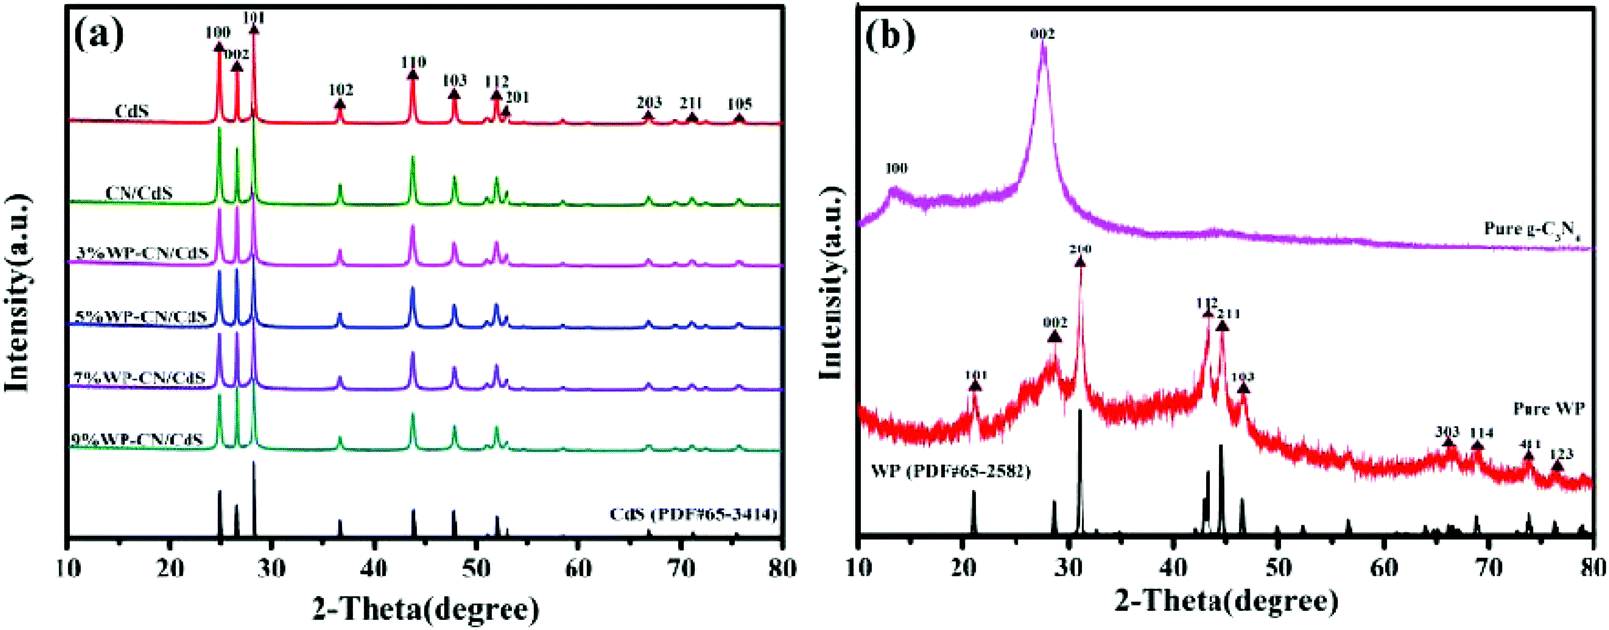 Photoelectron Directional Transfer Over A G C3n4 Cds Heterojunction Modulated With Wp For Efficient Photocatalytic Hydrogen Evolution Dalton Transactions Rsc Publishing